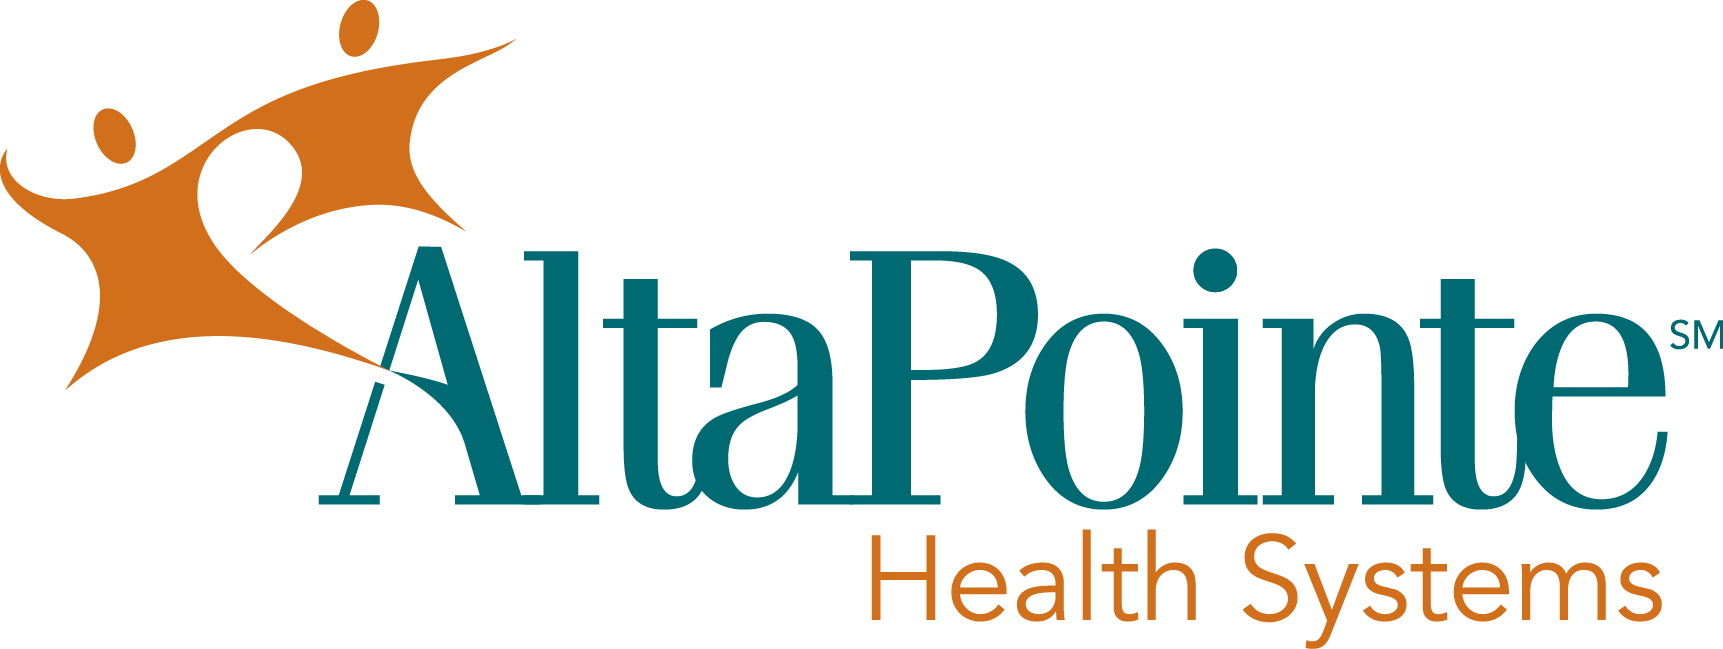 Image result for altapointe health systems